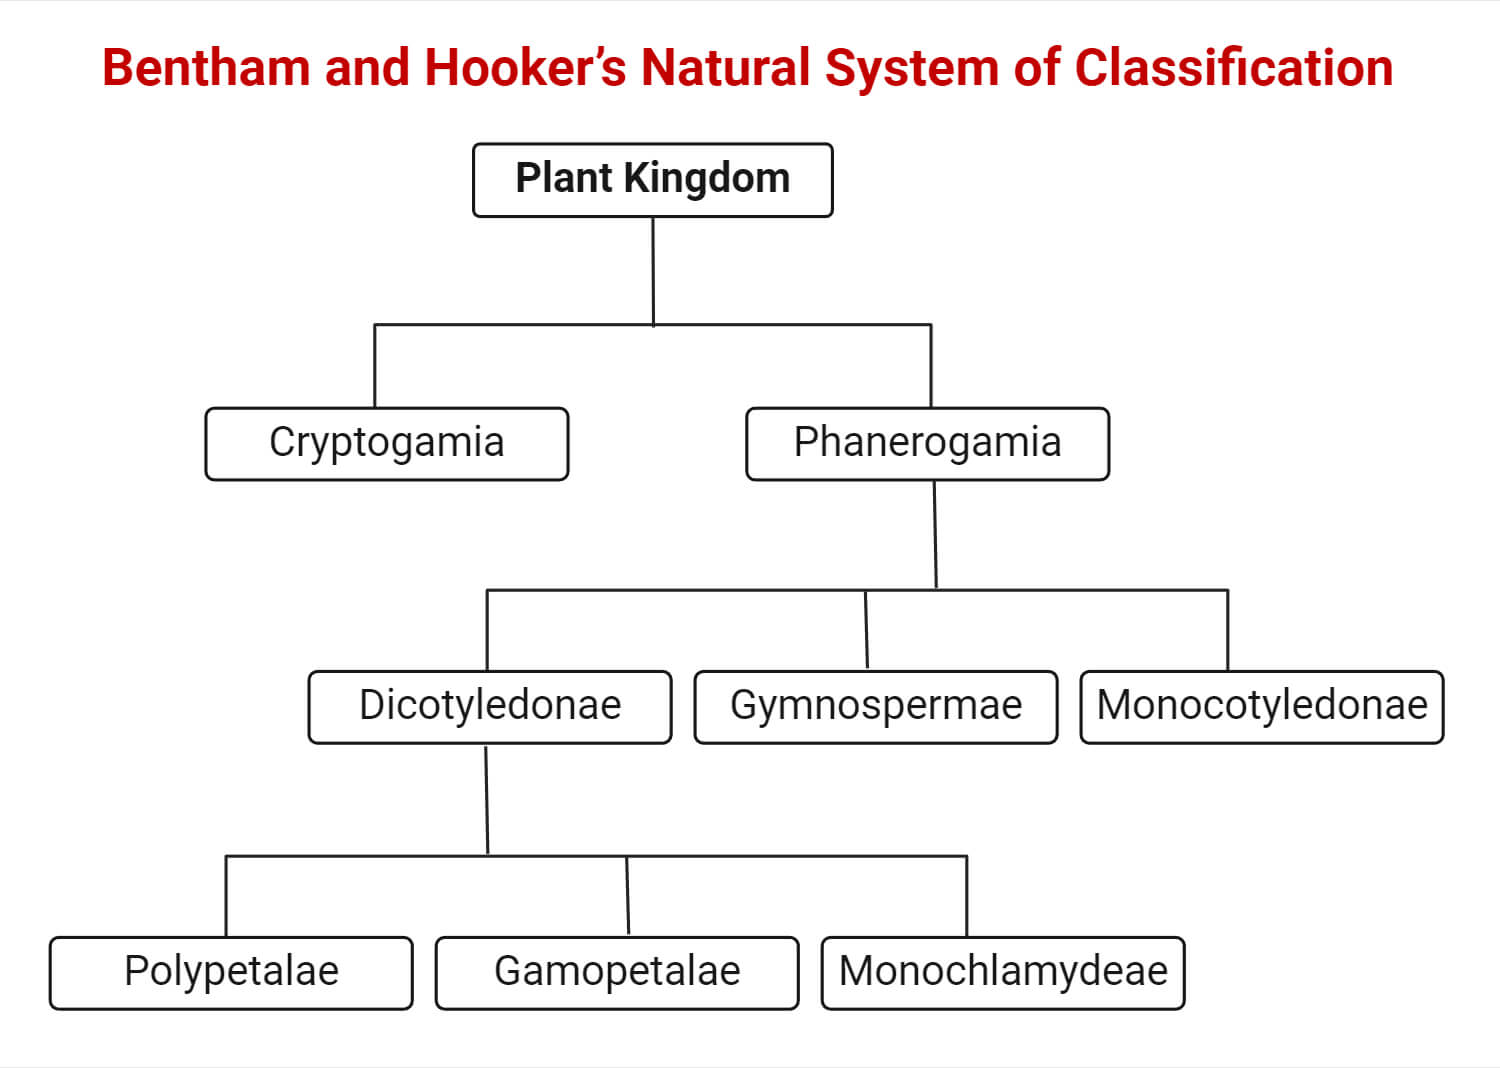 Bentham and Hooker’s Natural System of Classification